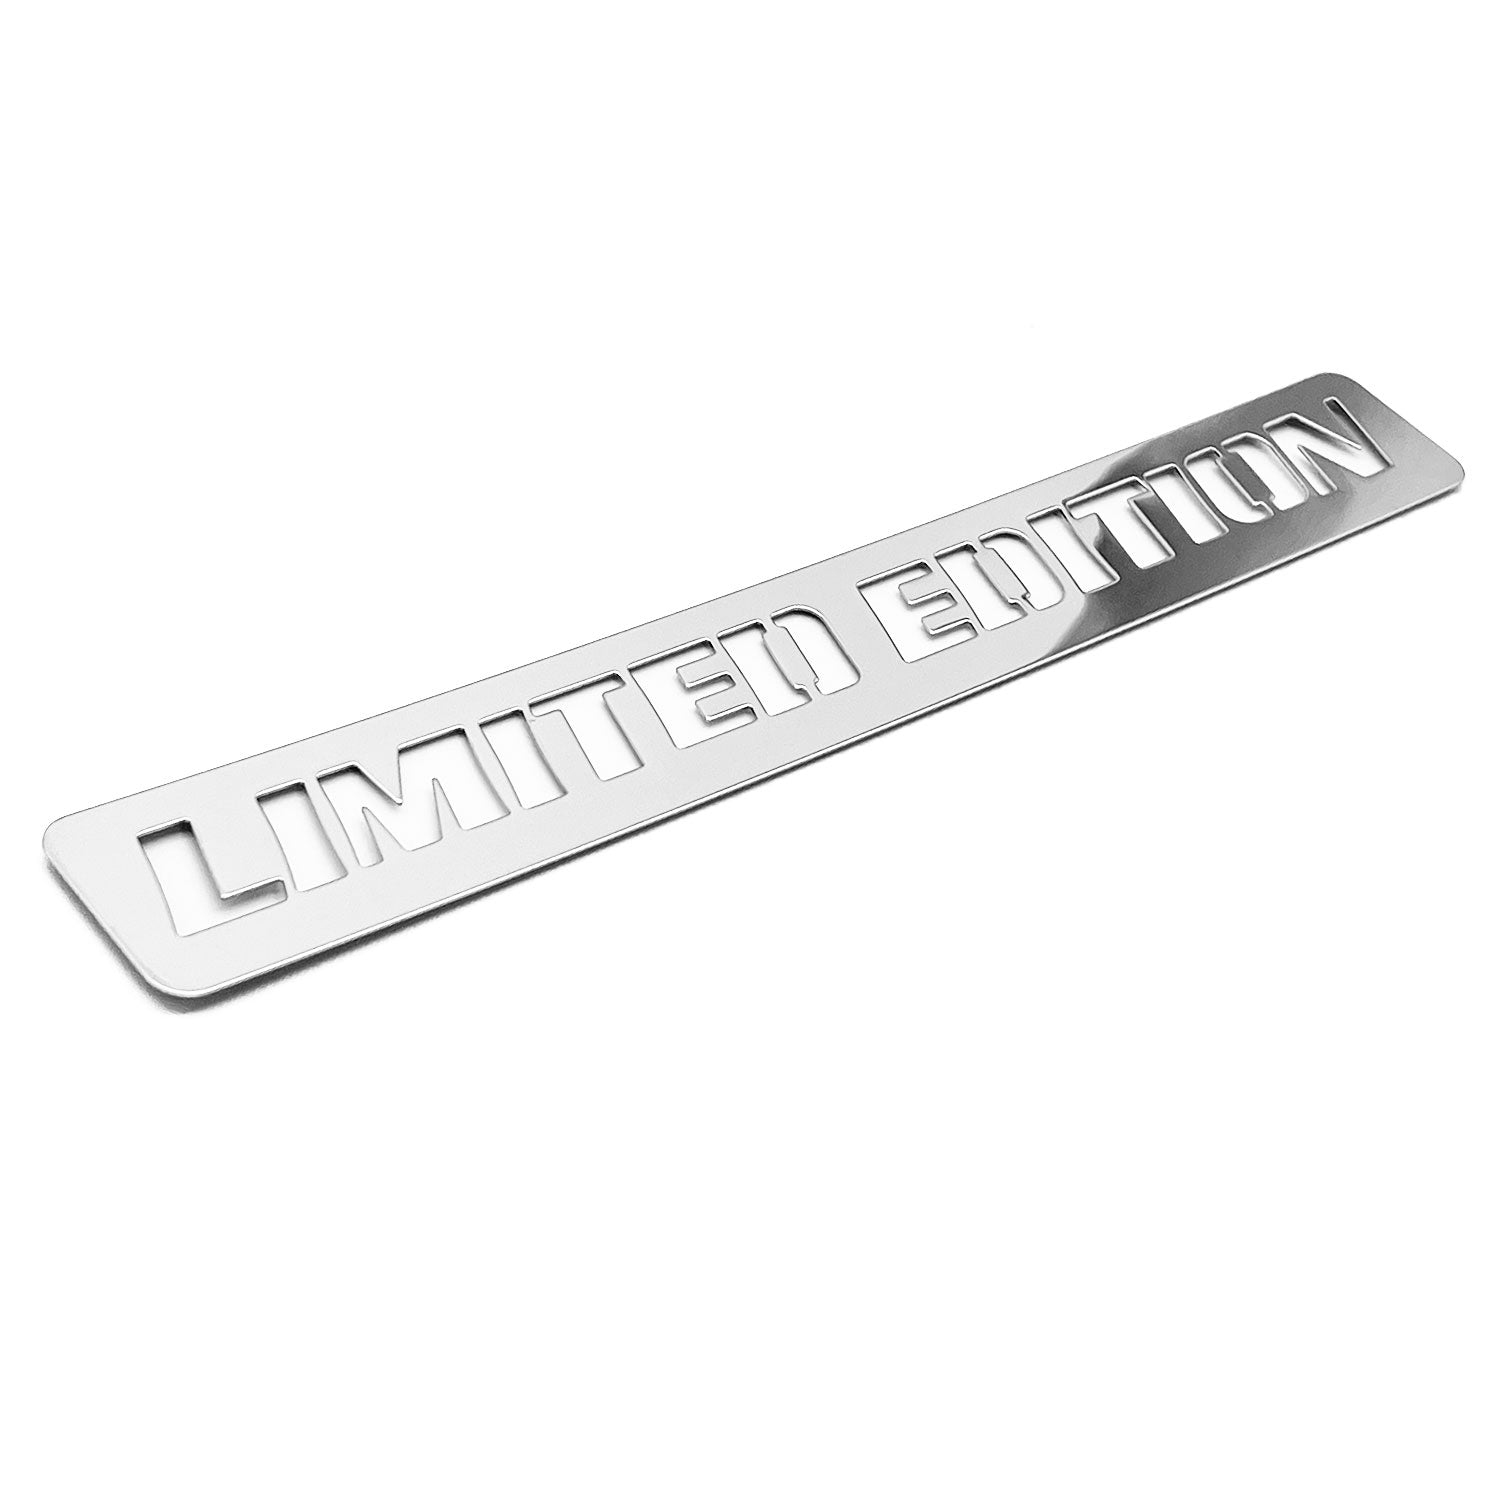 Limited Edition Emblem Badge Decal Sticker 3D Cutout Stainless Steel Dual Layer